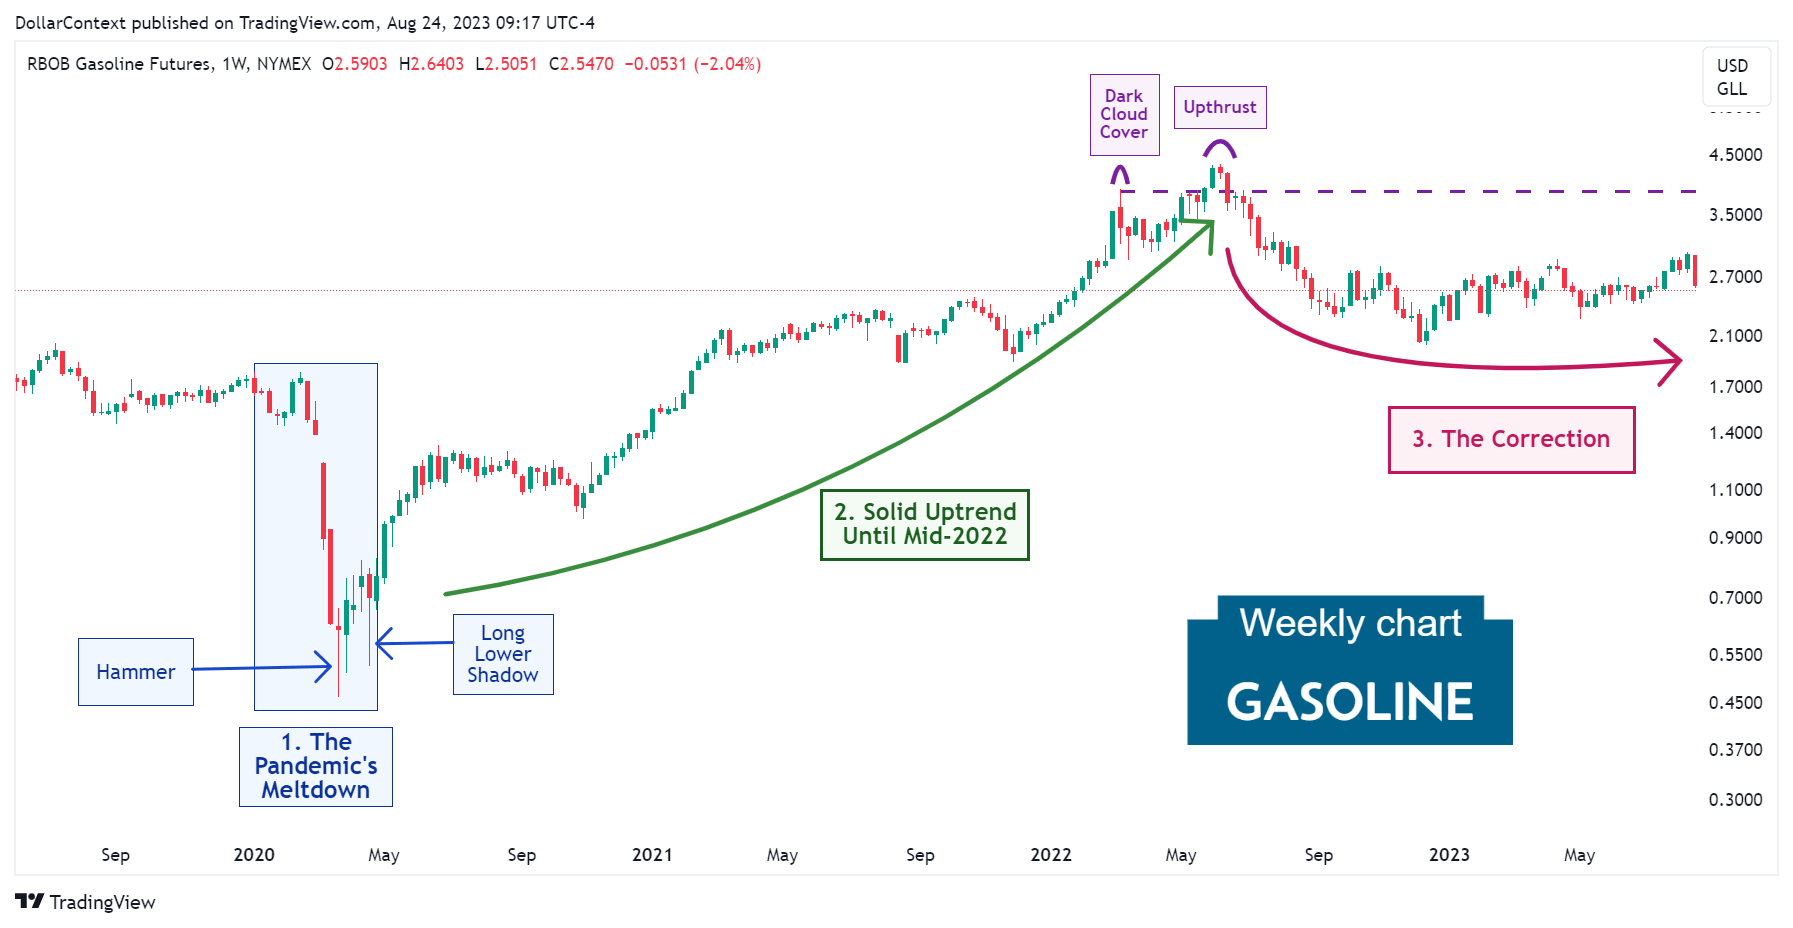 Gasoline Futures: The Correction in 2022 and 2023 (Weekly Chart)